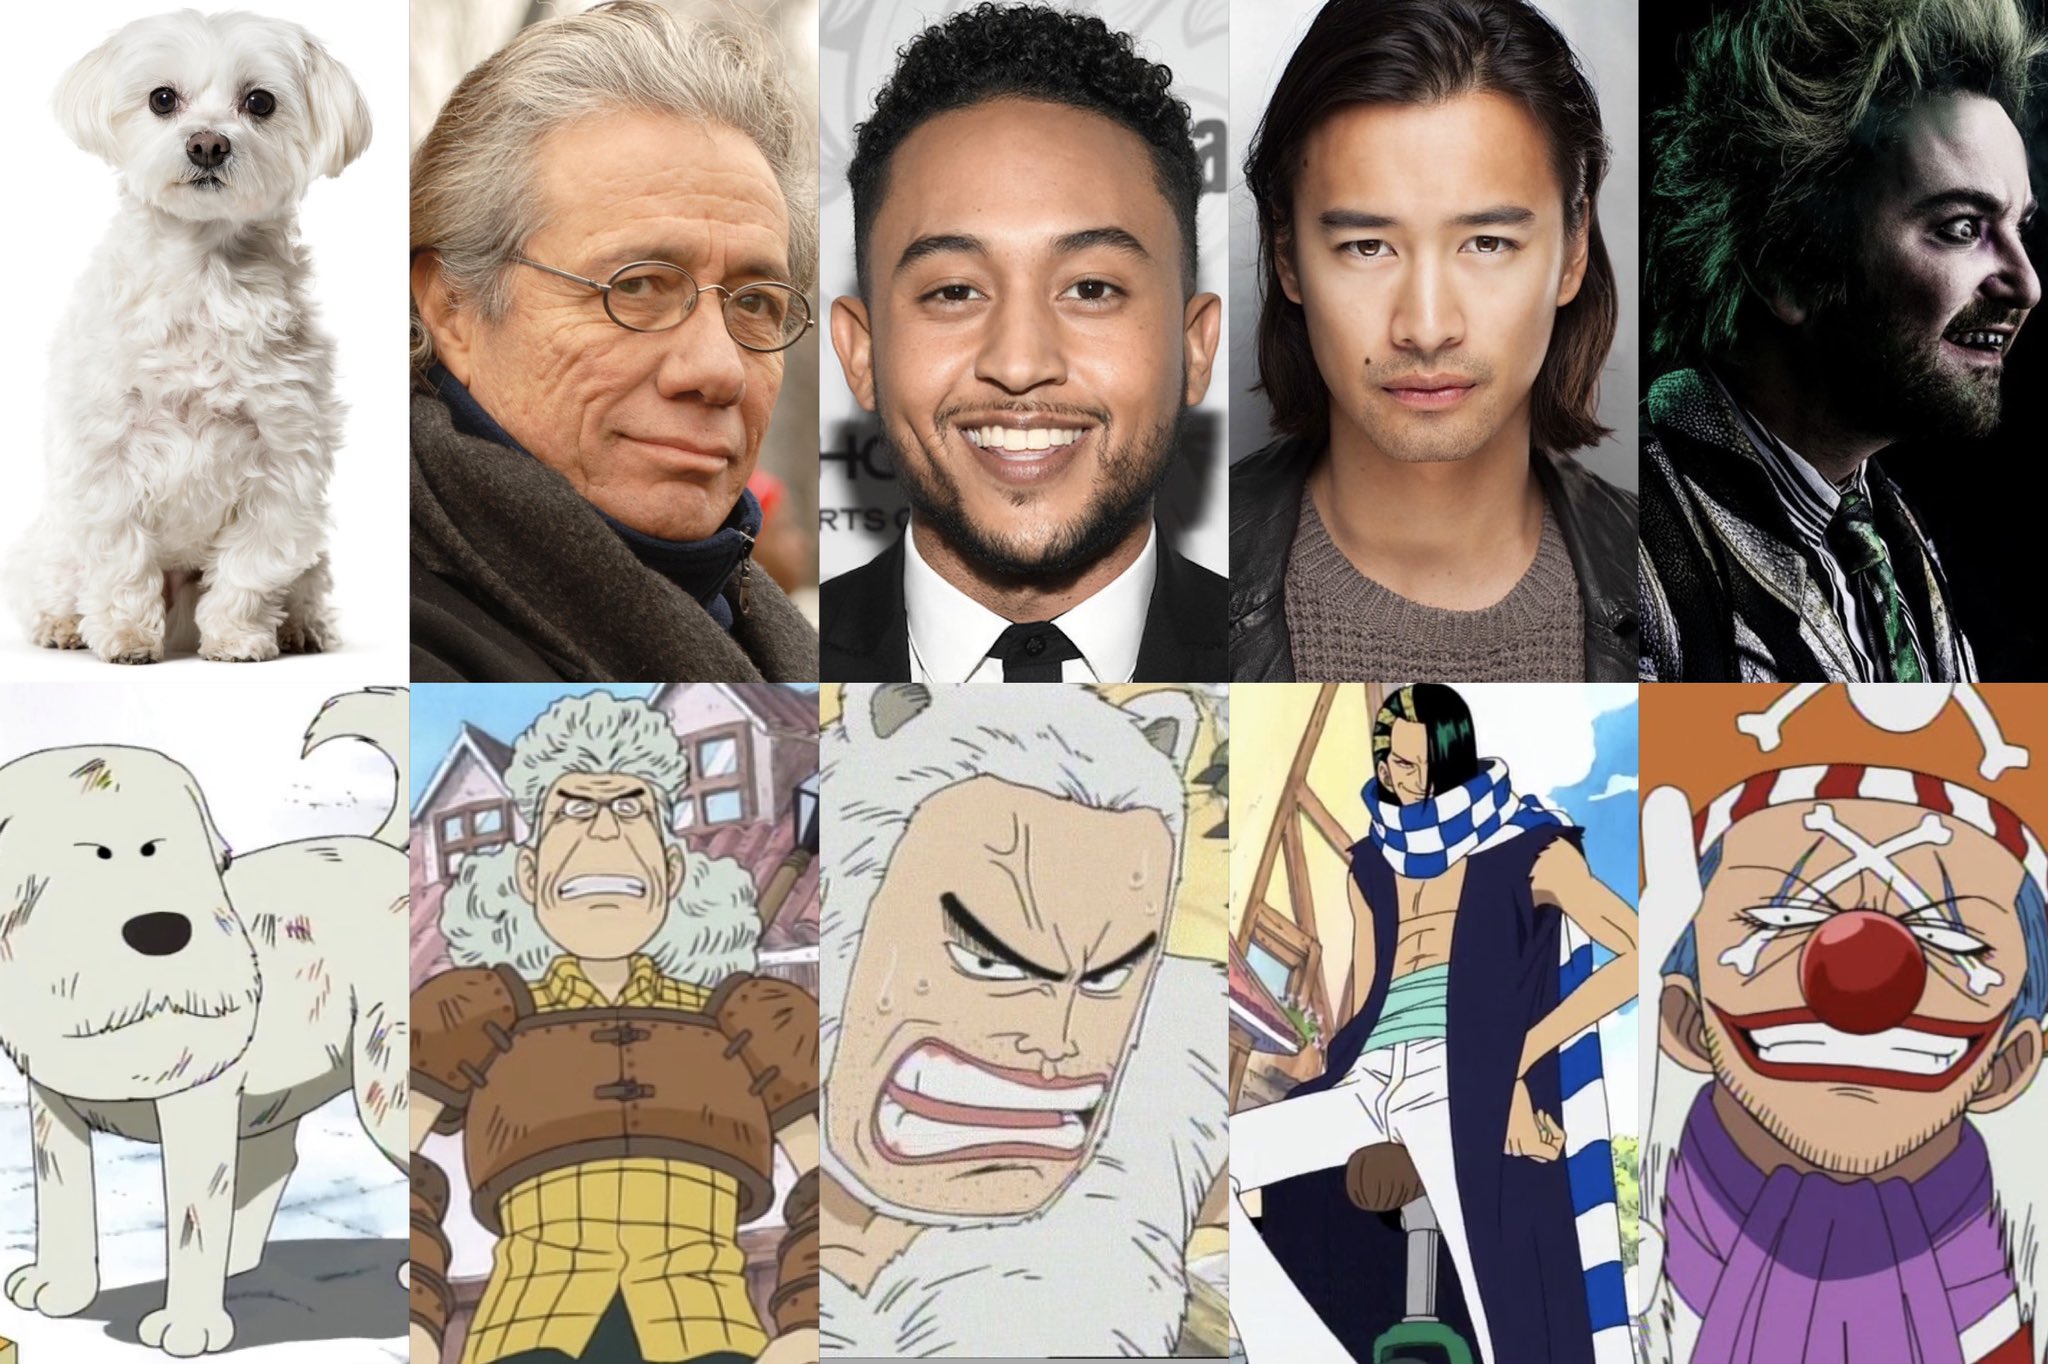 Don Krieg Fan Casting for One Piece Live Action